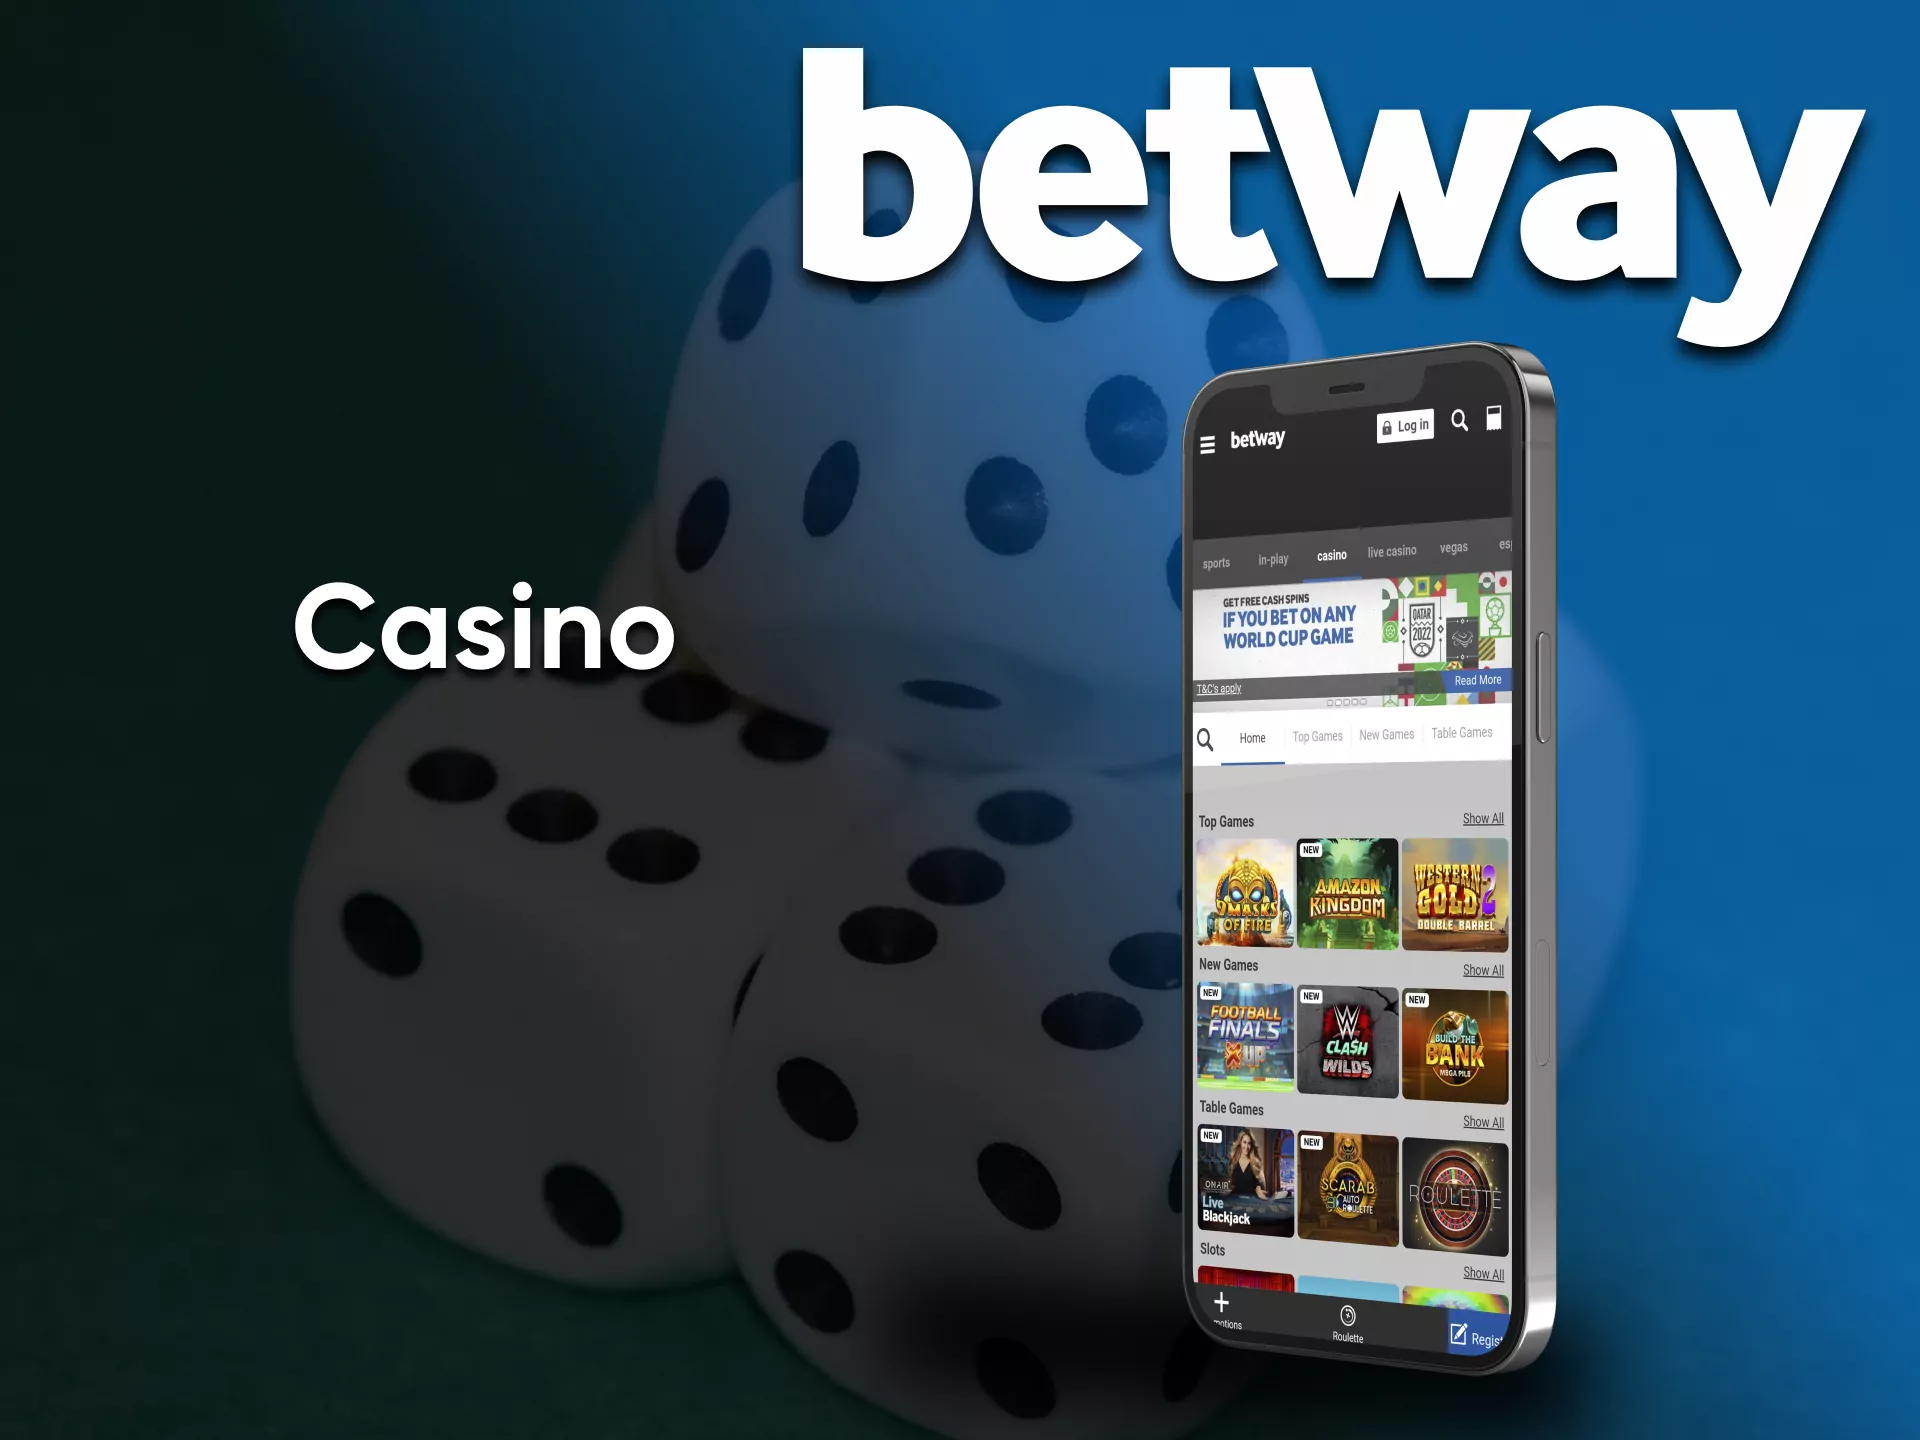 In the Betway app, you can play casino.